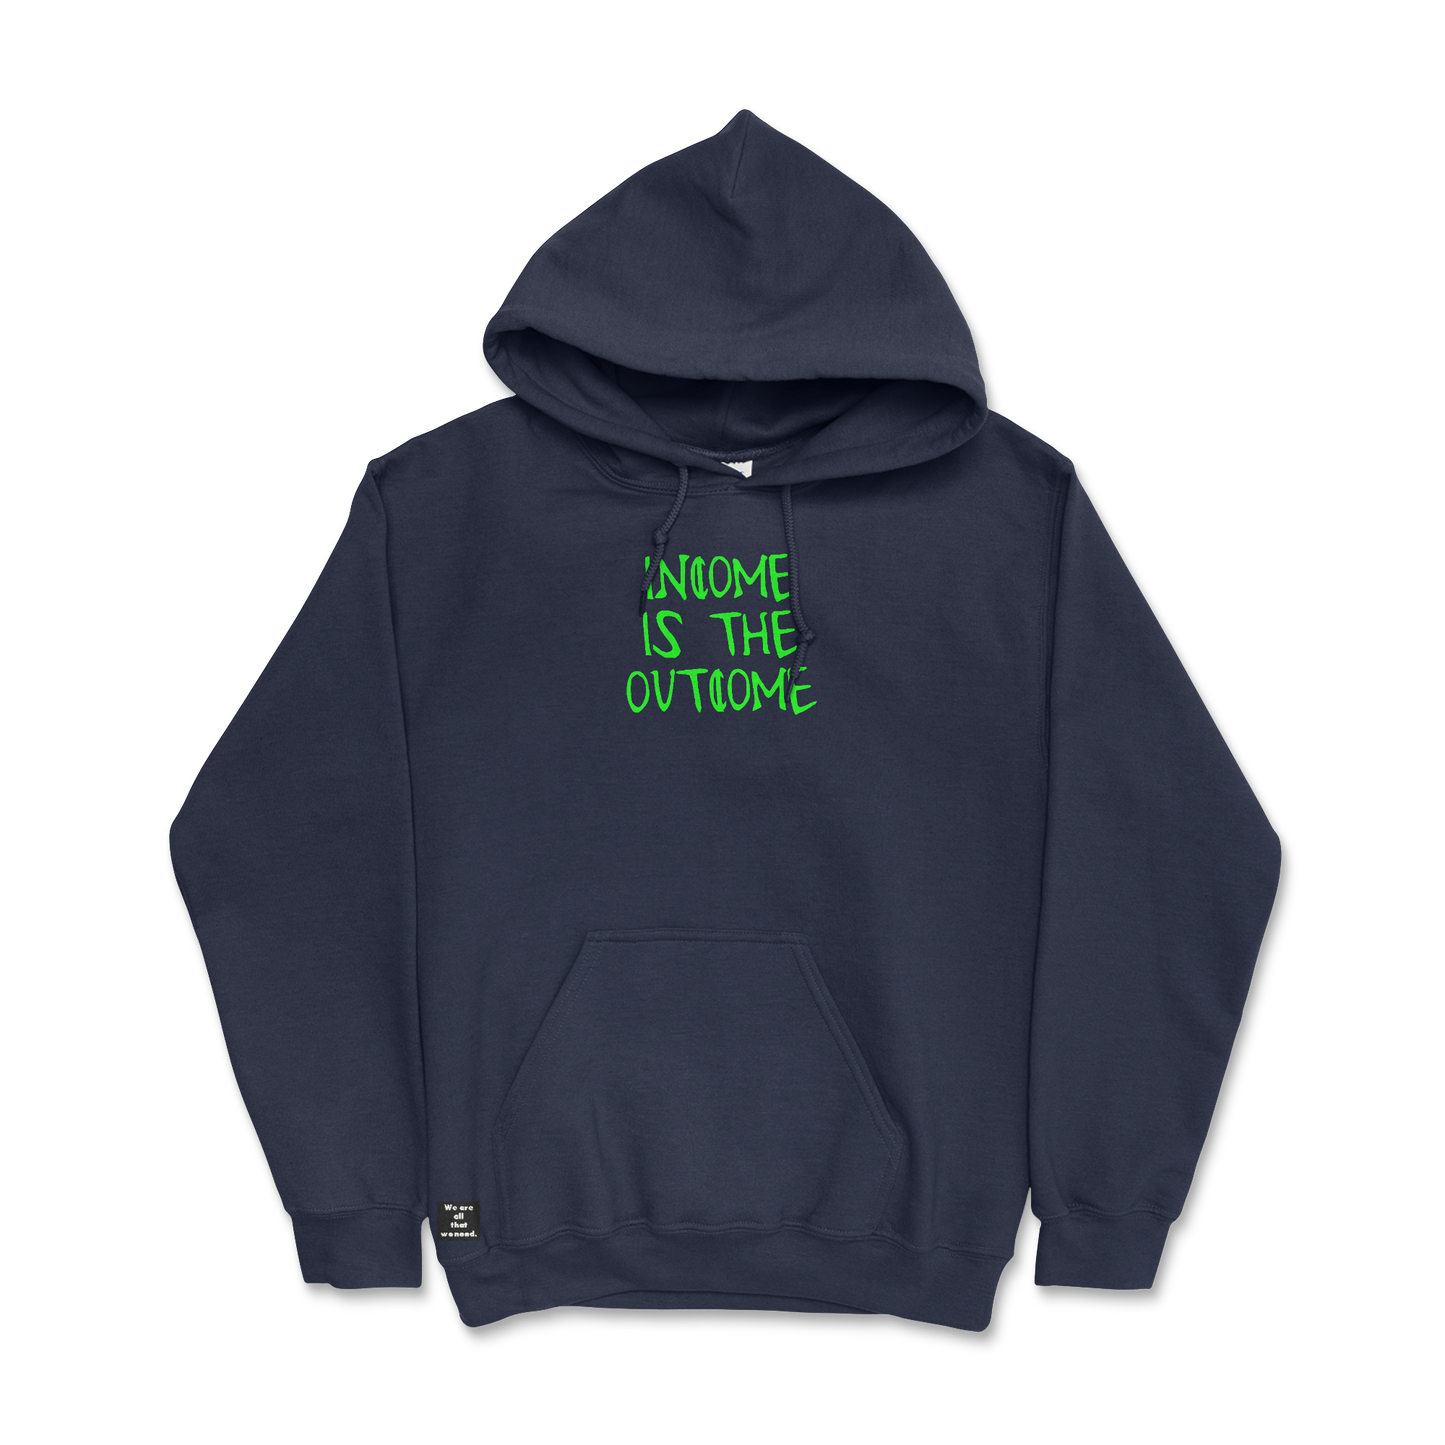 Only Outcome Hoodie